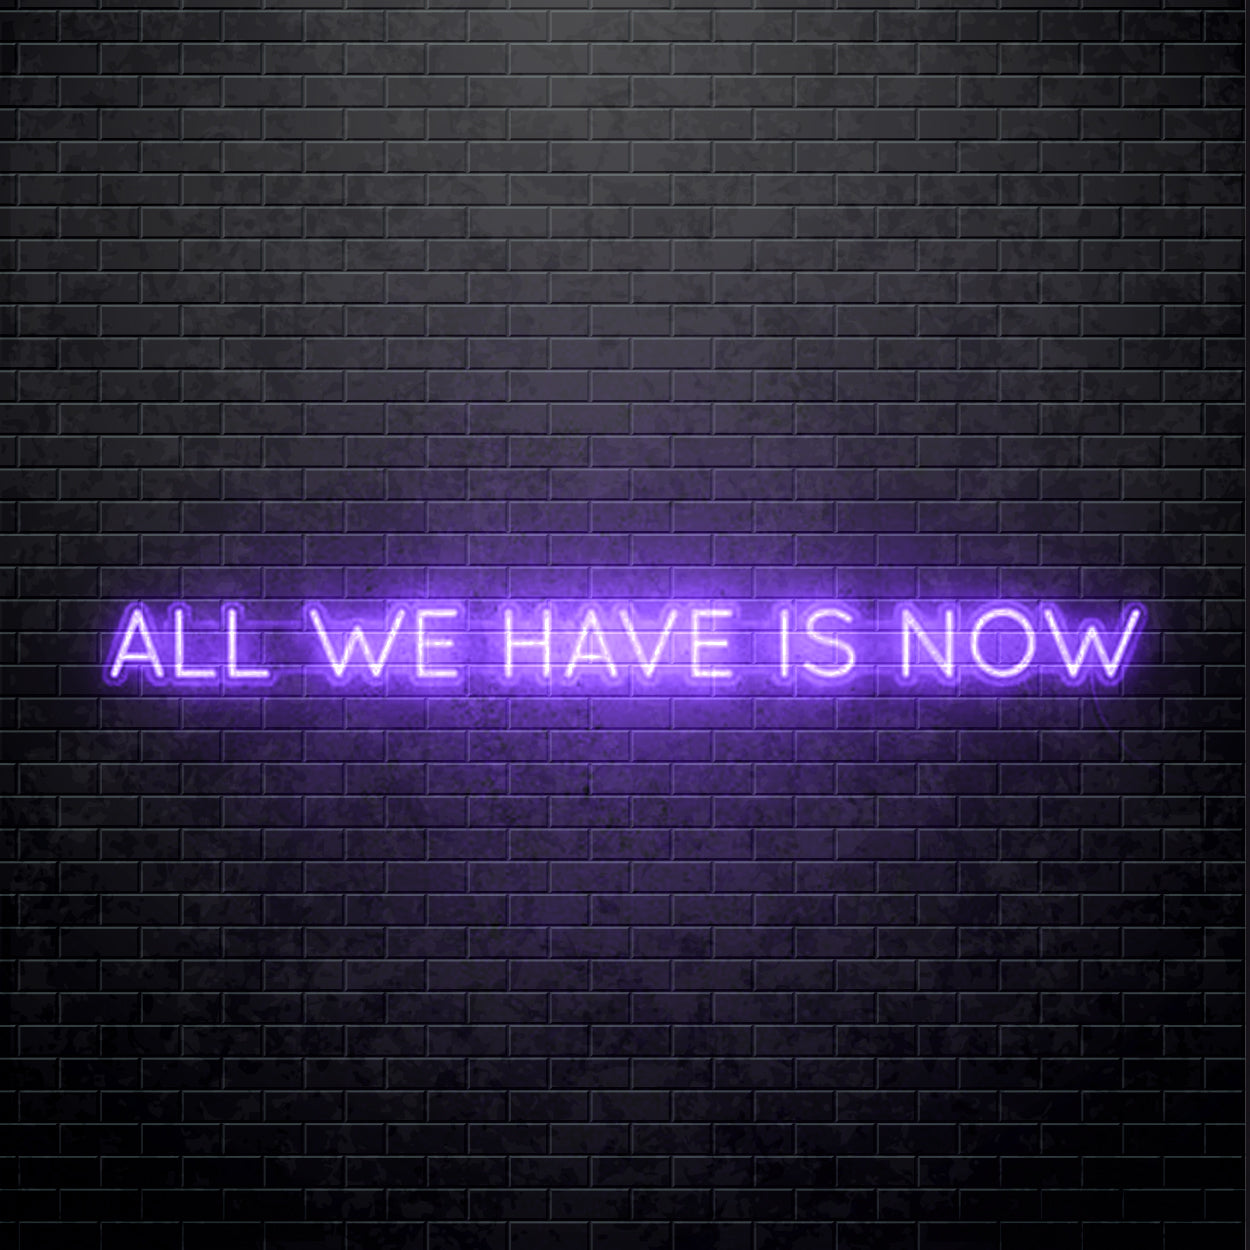 LED Neon Sign - All we have is now